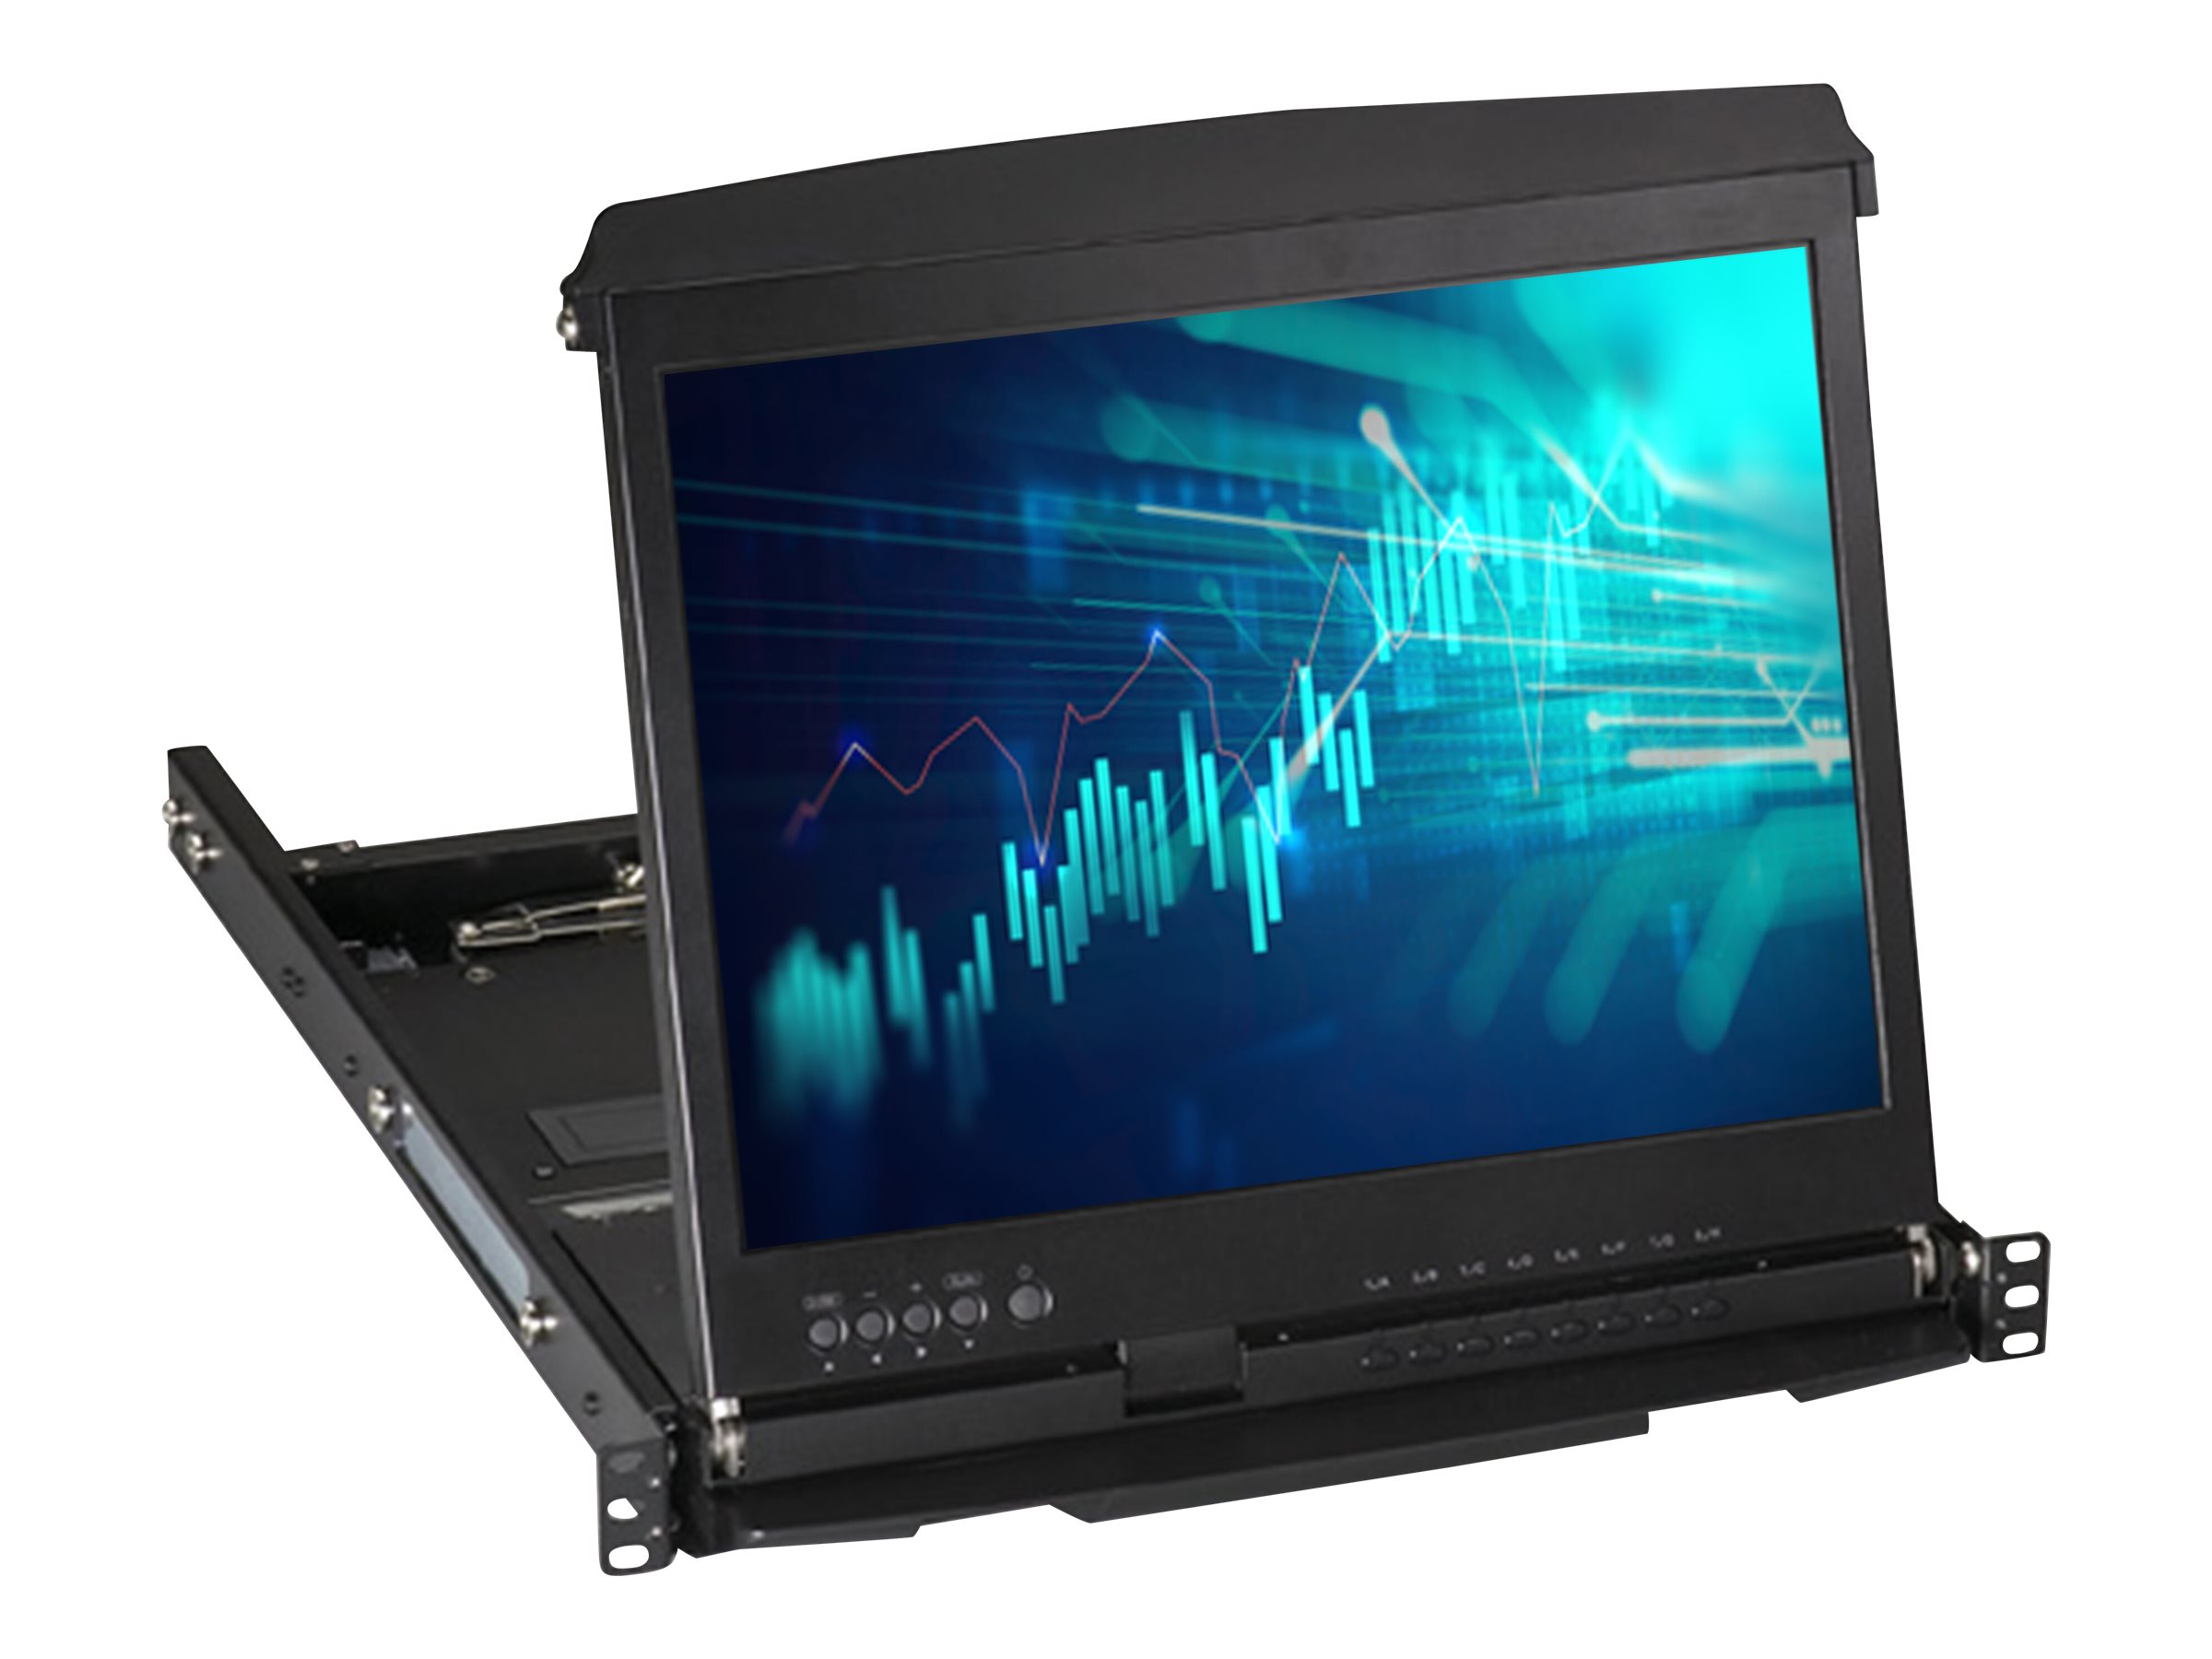 Black Box ServView V Widescreen LCD Console Drawer with 8-Port KVM Switch - DVI-D, USB - KVM console...